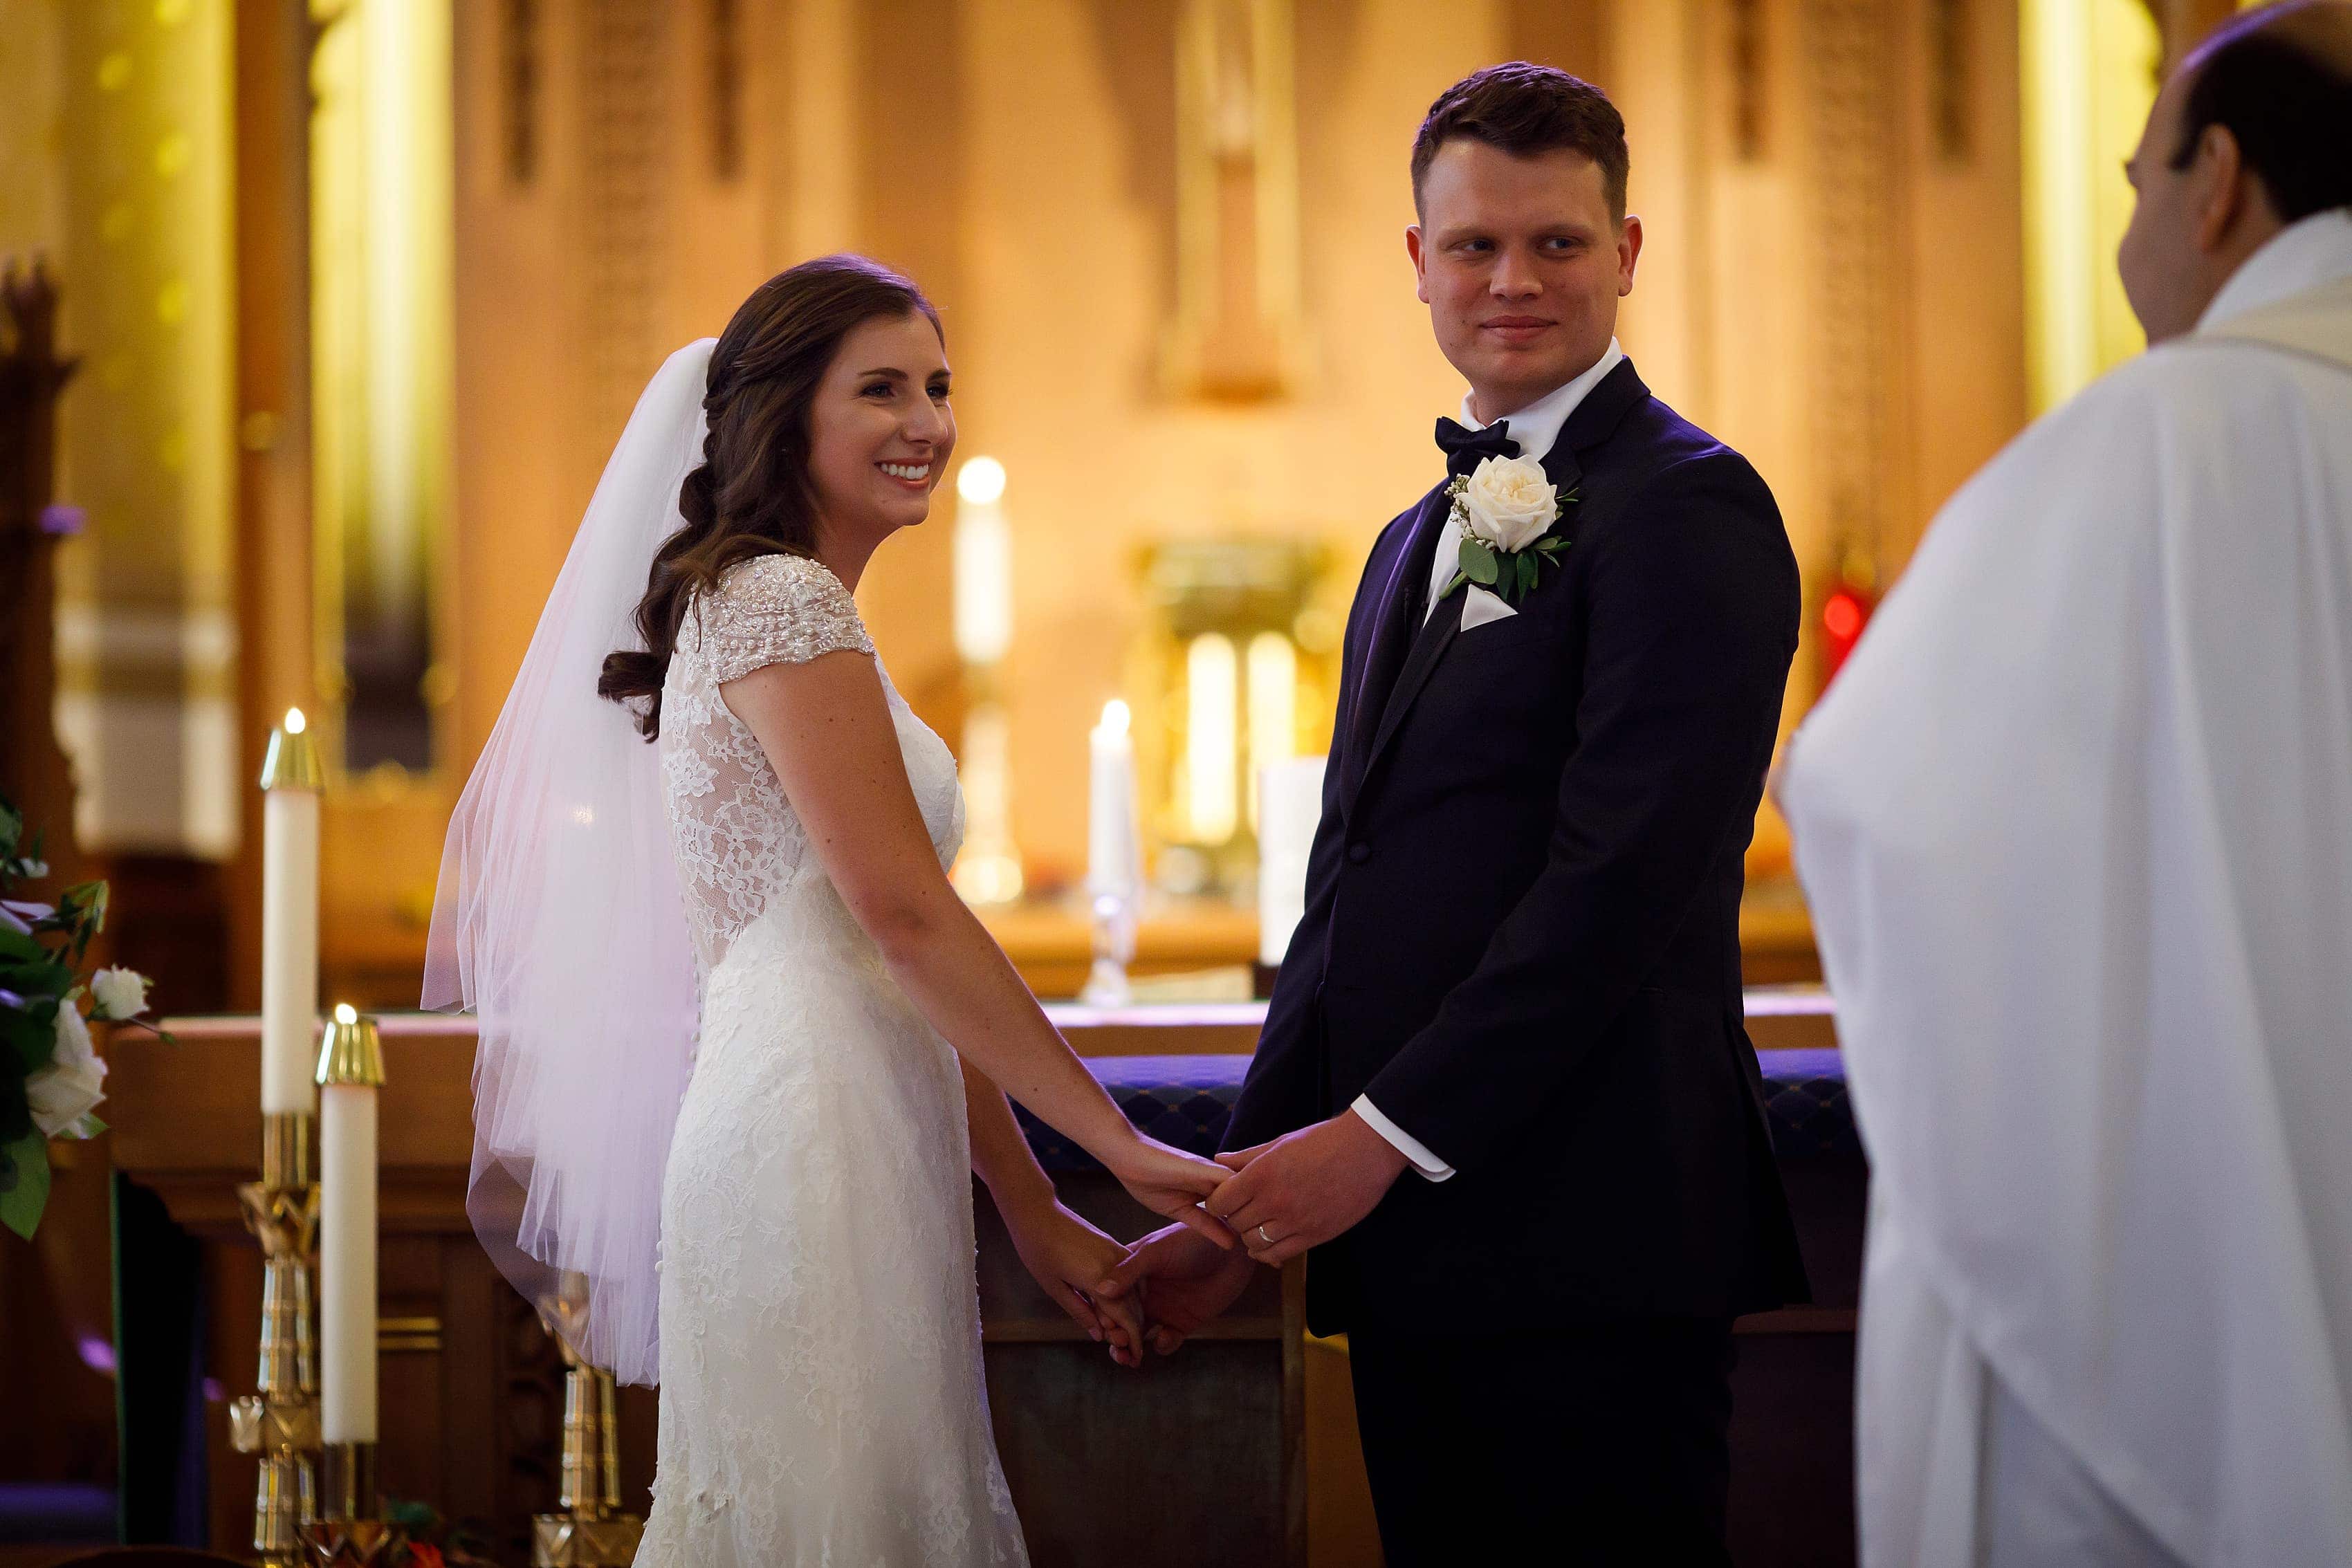 Bride and groom smile at the alter during wedding ceremony at St. Francis Church in Lake Geneva, Wisconsin